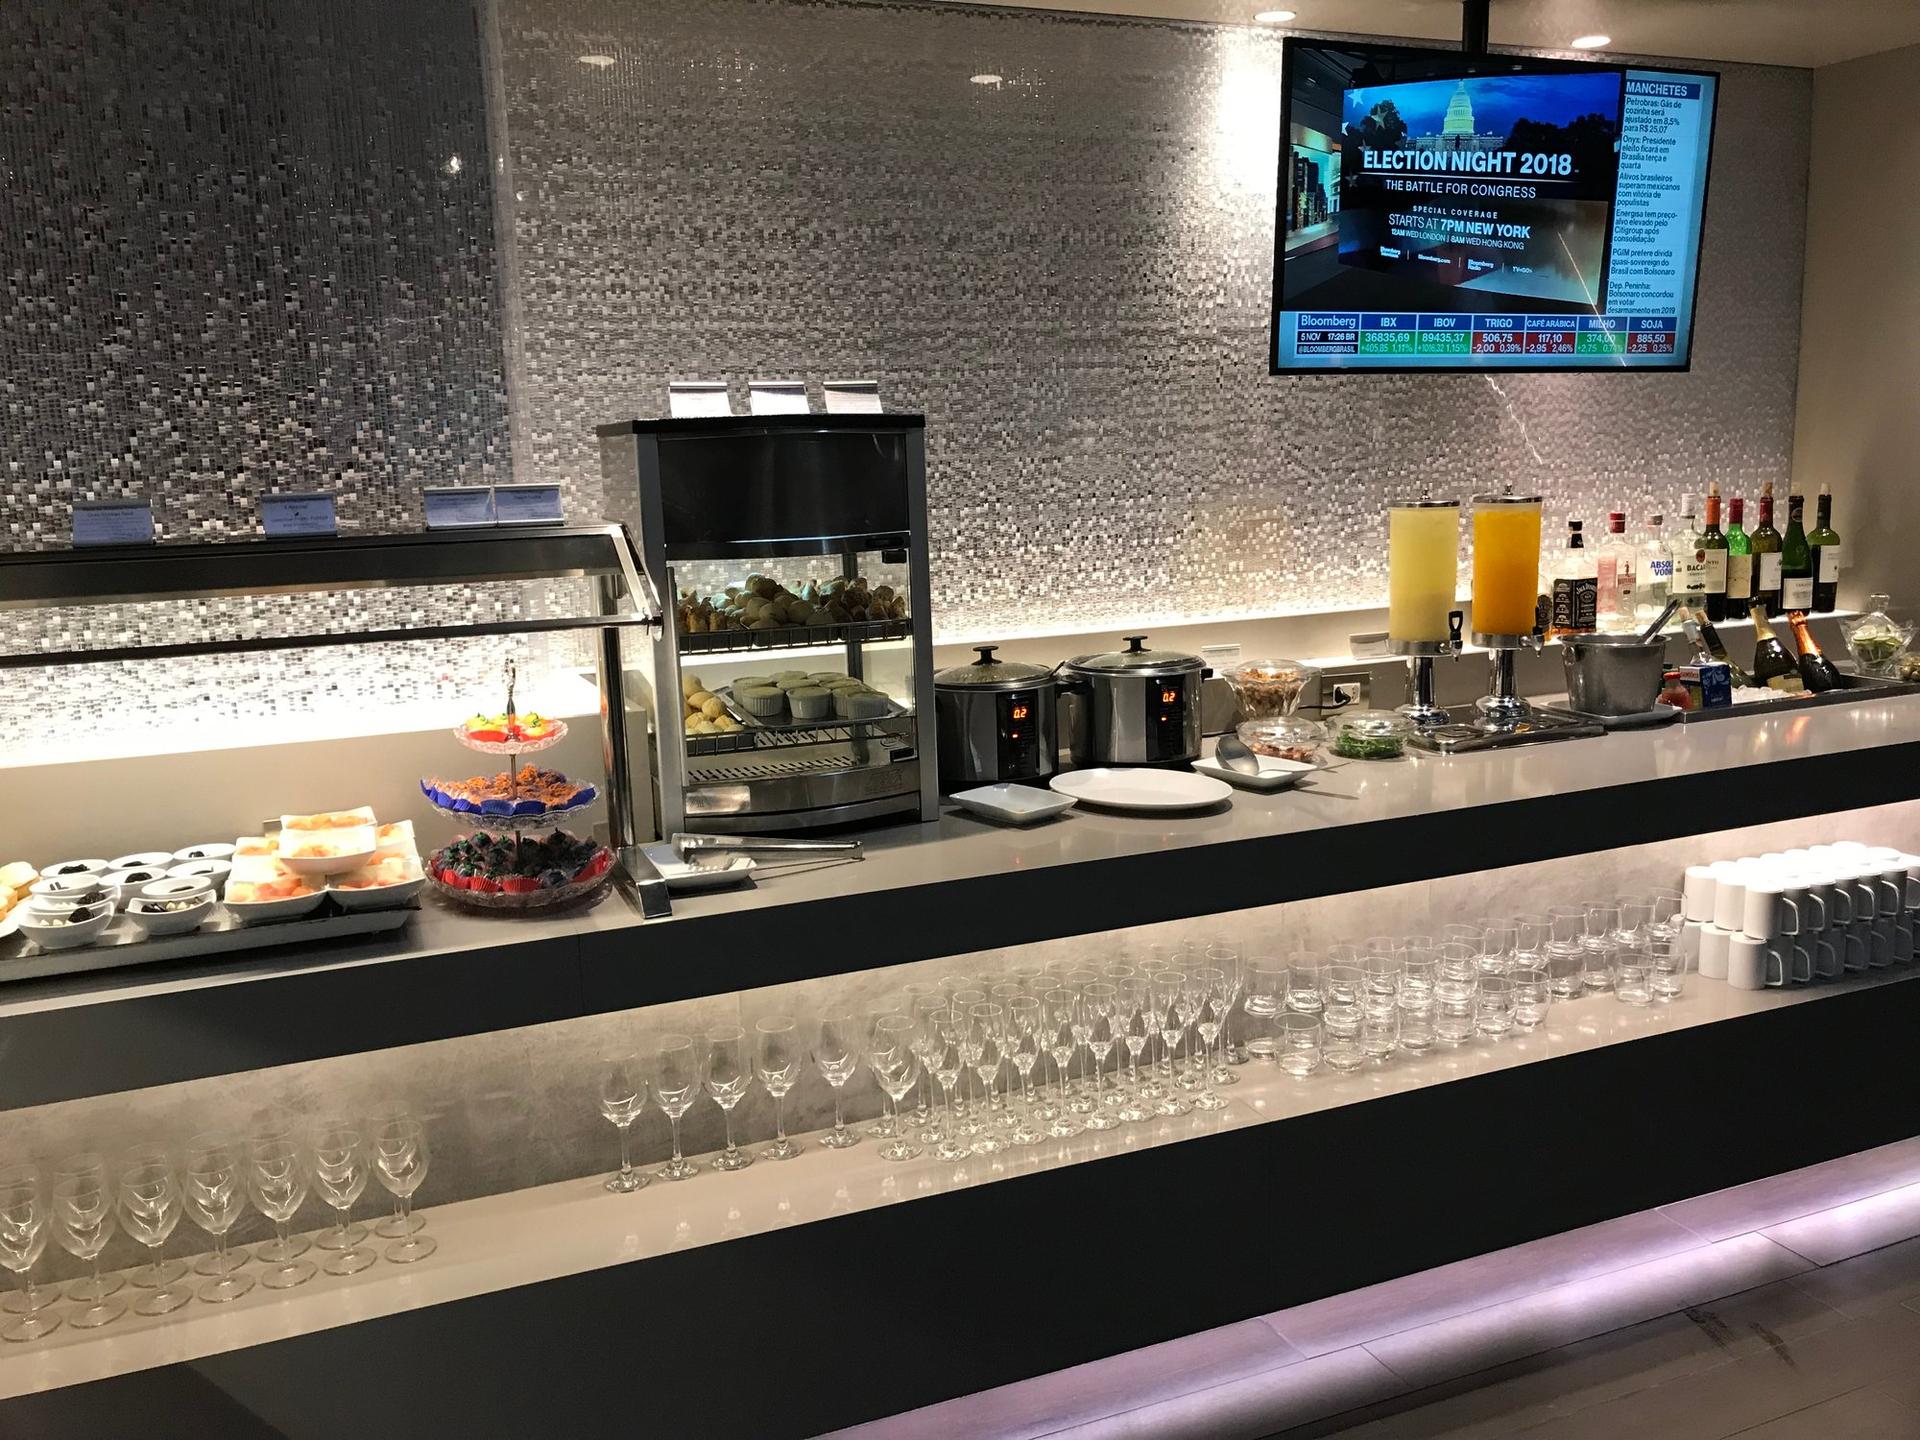 American Airlines Admirals Club image 21 of 30